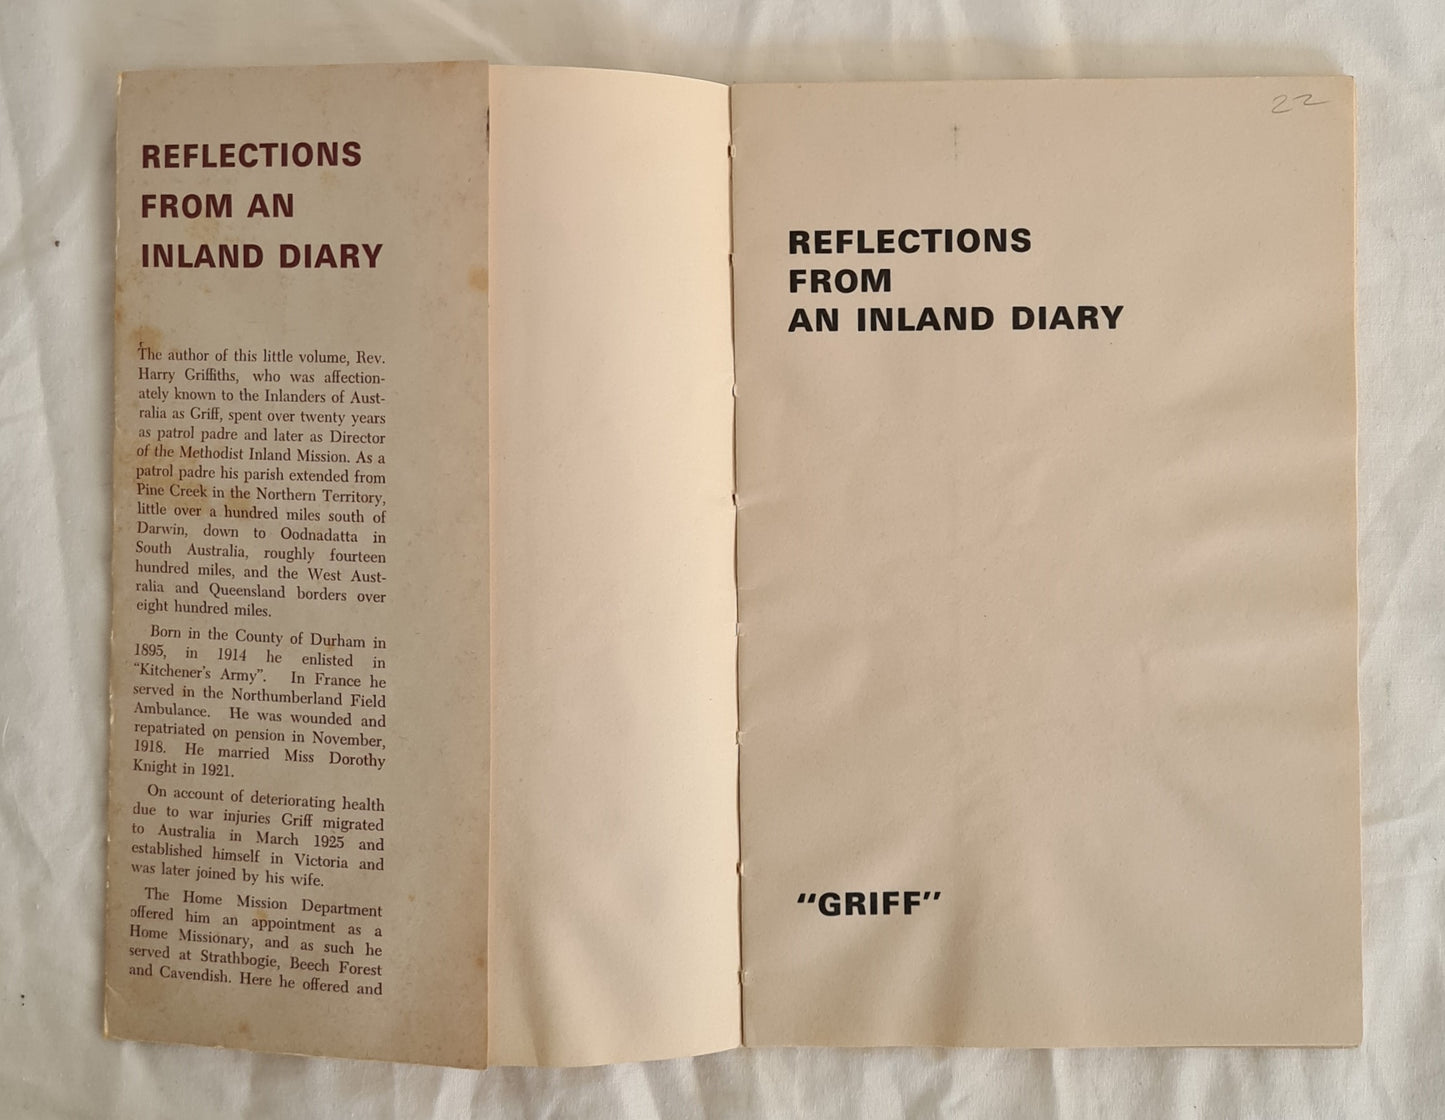 Reflections From An Inland Diary by Harry Griffiths “Griff”